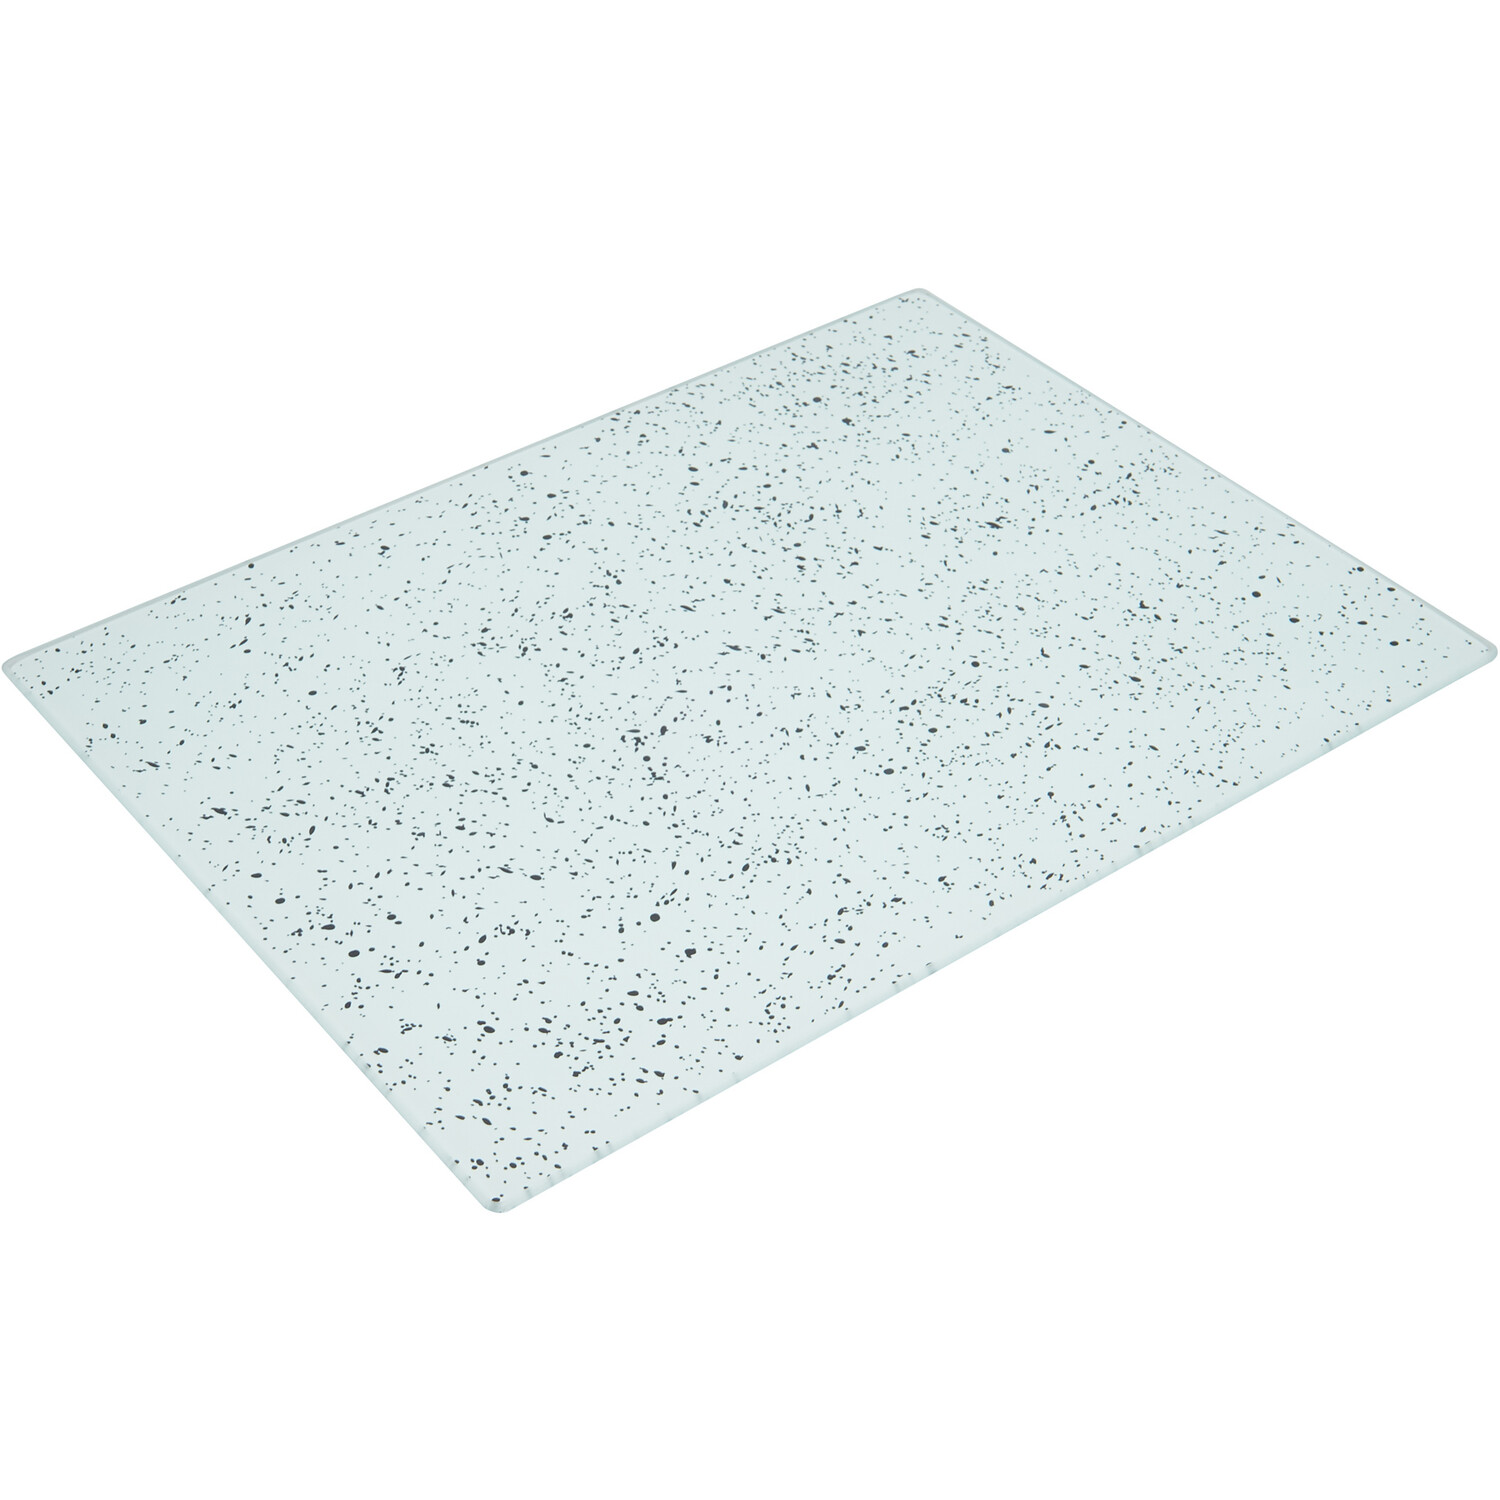 Speckle Glass Worktop Saver - Clear Image 1